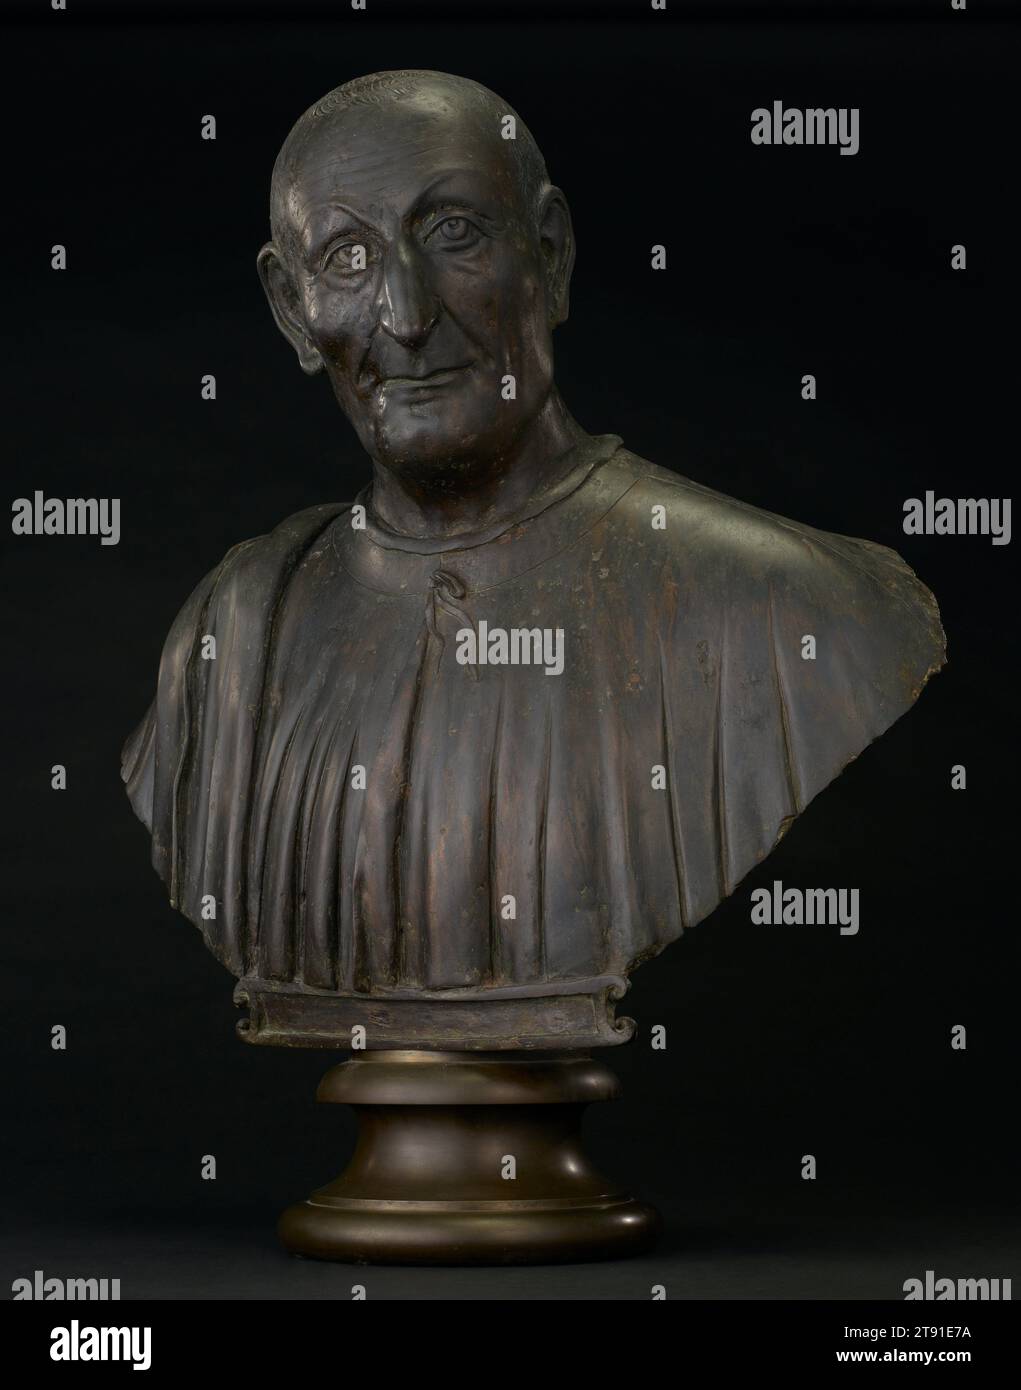 Portrait of Luca Salvioni, c. 1536, Agostino Zoppo, Italian (Padua), Italian (Padua), 1520–1572, 28 3/4 x 23 in. (73.03 x 58.42 cm), Bronze, Italy, 16th century, Deep wrinkles, gaunt cheeks, strong jaw—the scholar and law professor Luca Salvioni is portrayed with precision and no embellishment. There is no attempt to conform to an ideal or a standard of beauty. Renaissance sculptors often played up the singularity of a person’s face as a way of emphasizing the importance of the individual. Stock Photo